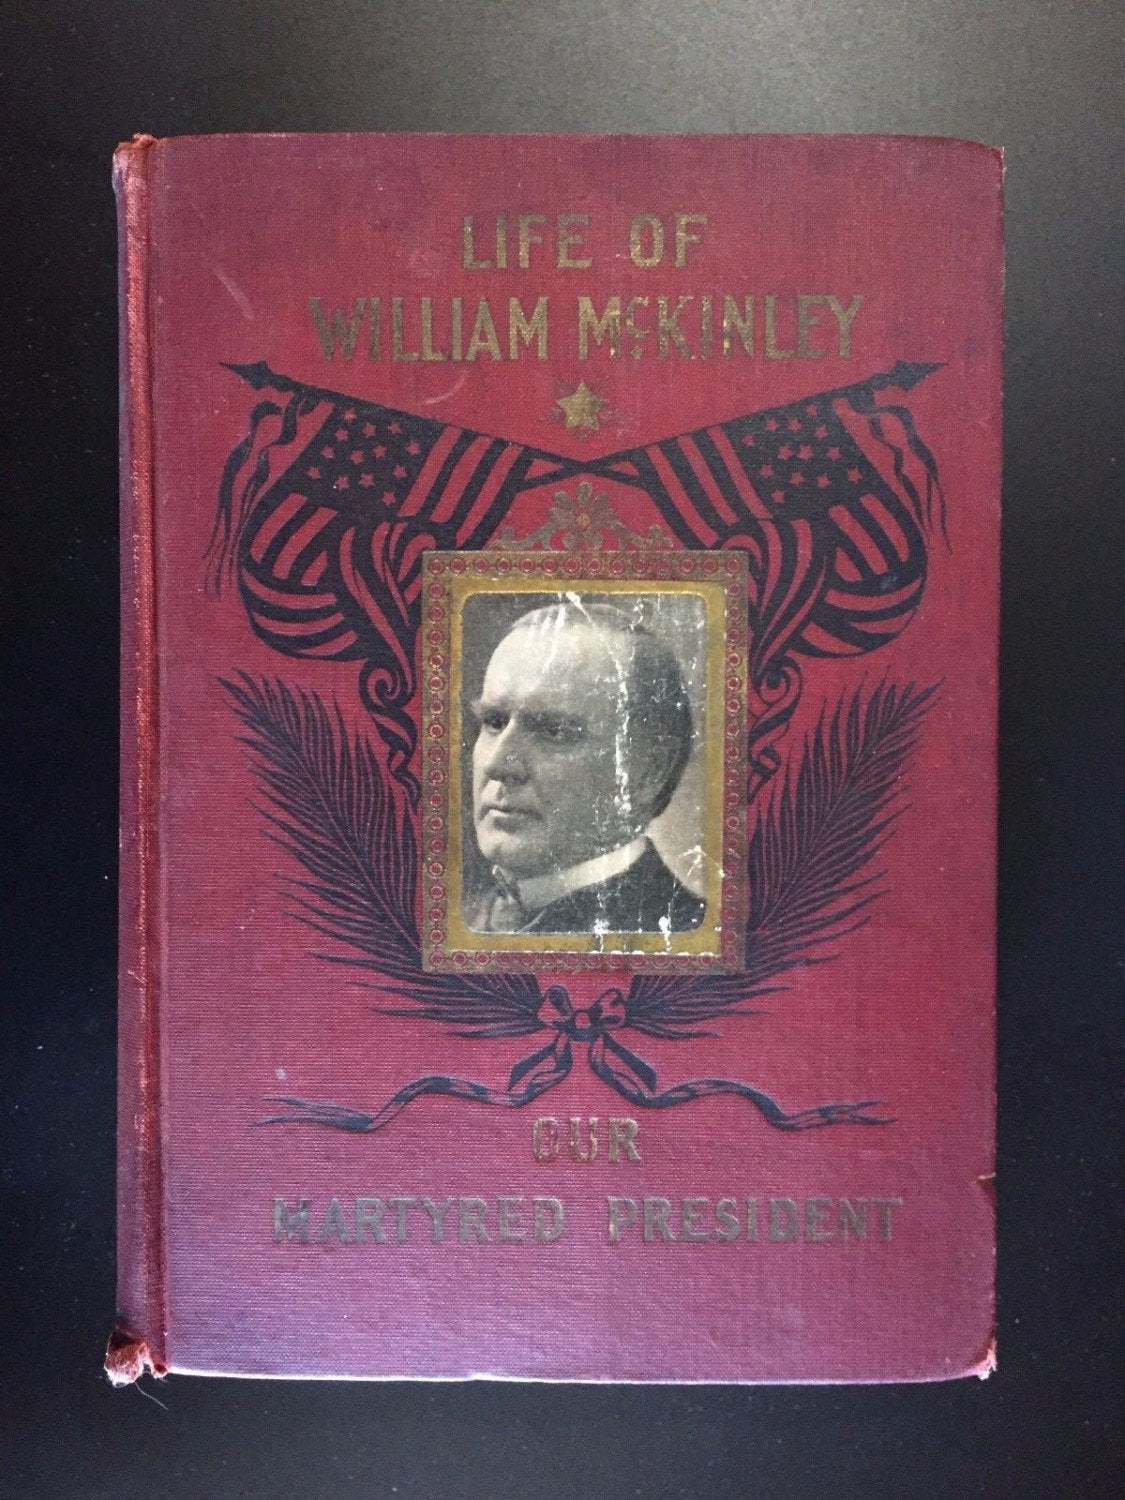 Life of William McKinley, by Samuel Fallows, 1901,1st Ed.